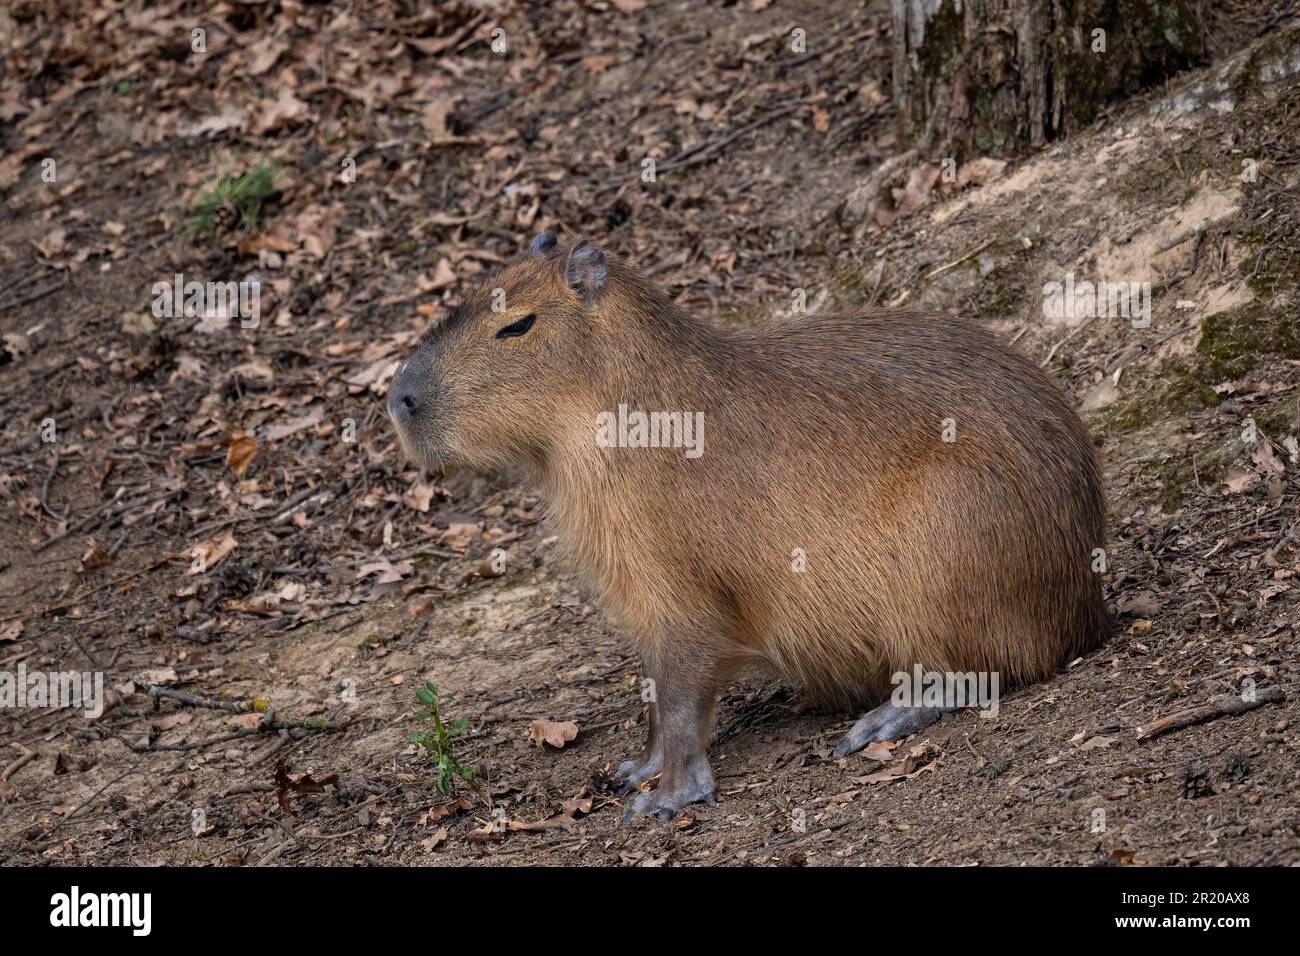 Capybara - Hydrochoerus hydrochaeris, giant rodent from Central and South American savannas, swamps and grasslands, Gamboa, Panama. Stock Photo